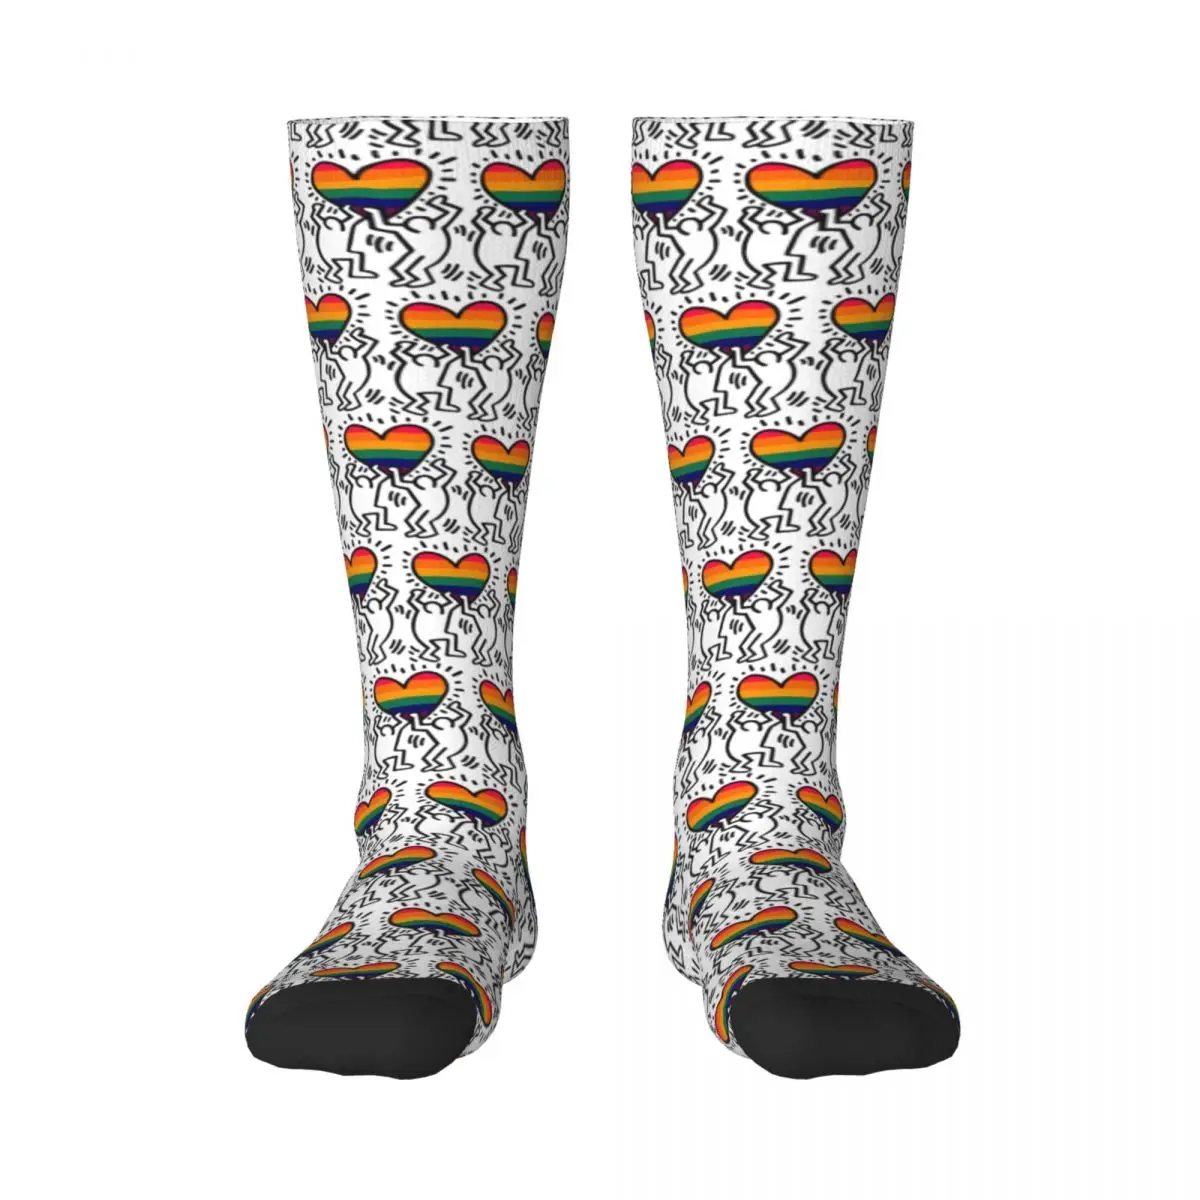 

Lgbt Gay Rainbow Pride Fruity 10 Contrast color socks INS style Elastic Stockings Funny Graphic Vintage Adult Stockings